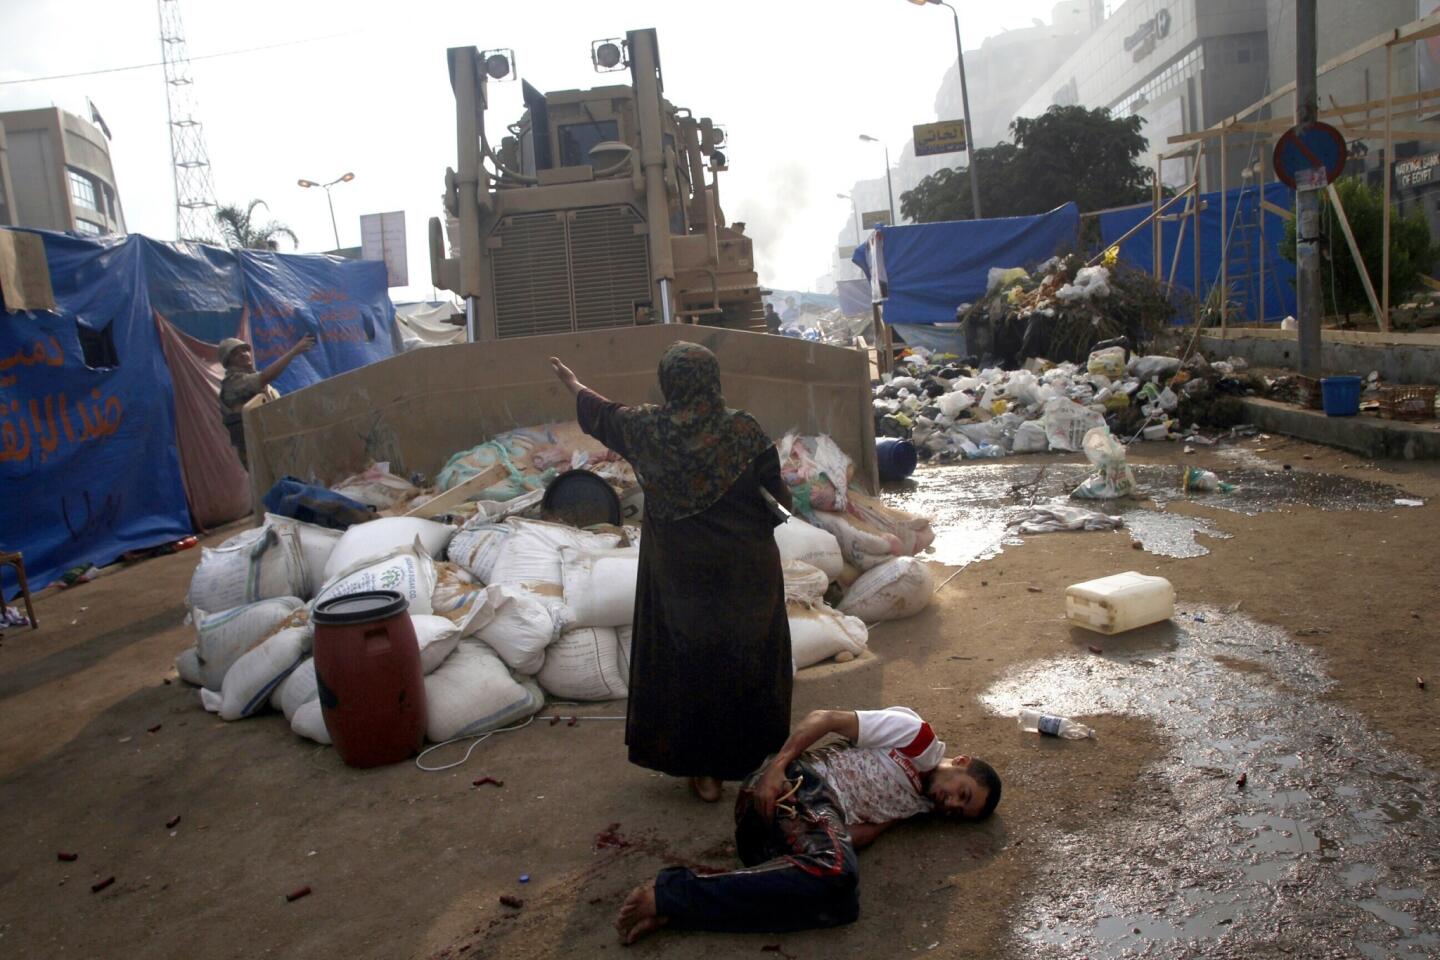 An Egyptian woman appeals to the driver of a military bulldozer as a wounded man lies in its path. Clashes between supporters of ousted President Mohamed Morsi and security forces spread across Egypt.